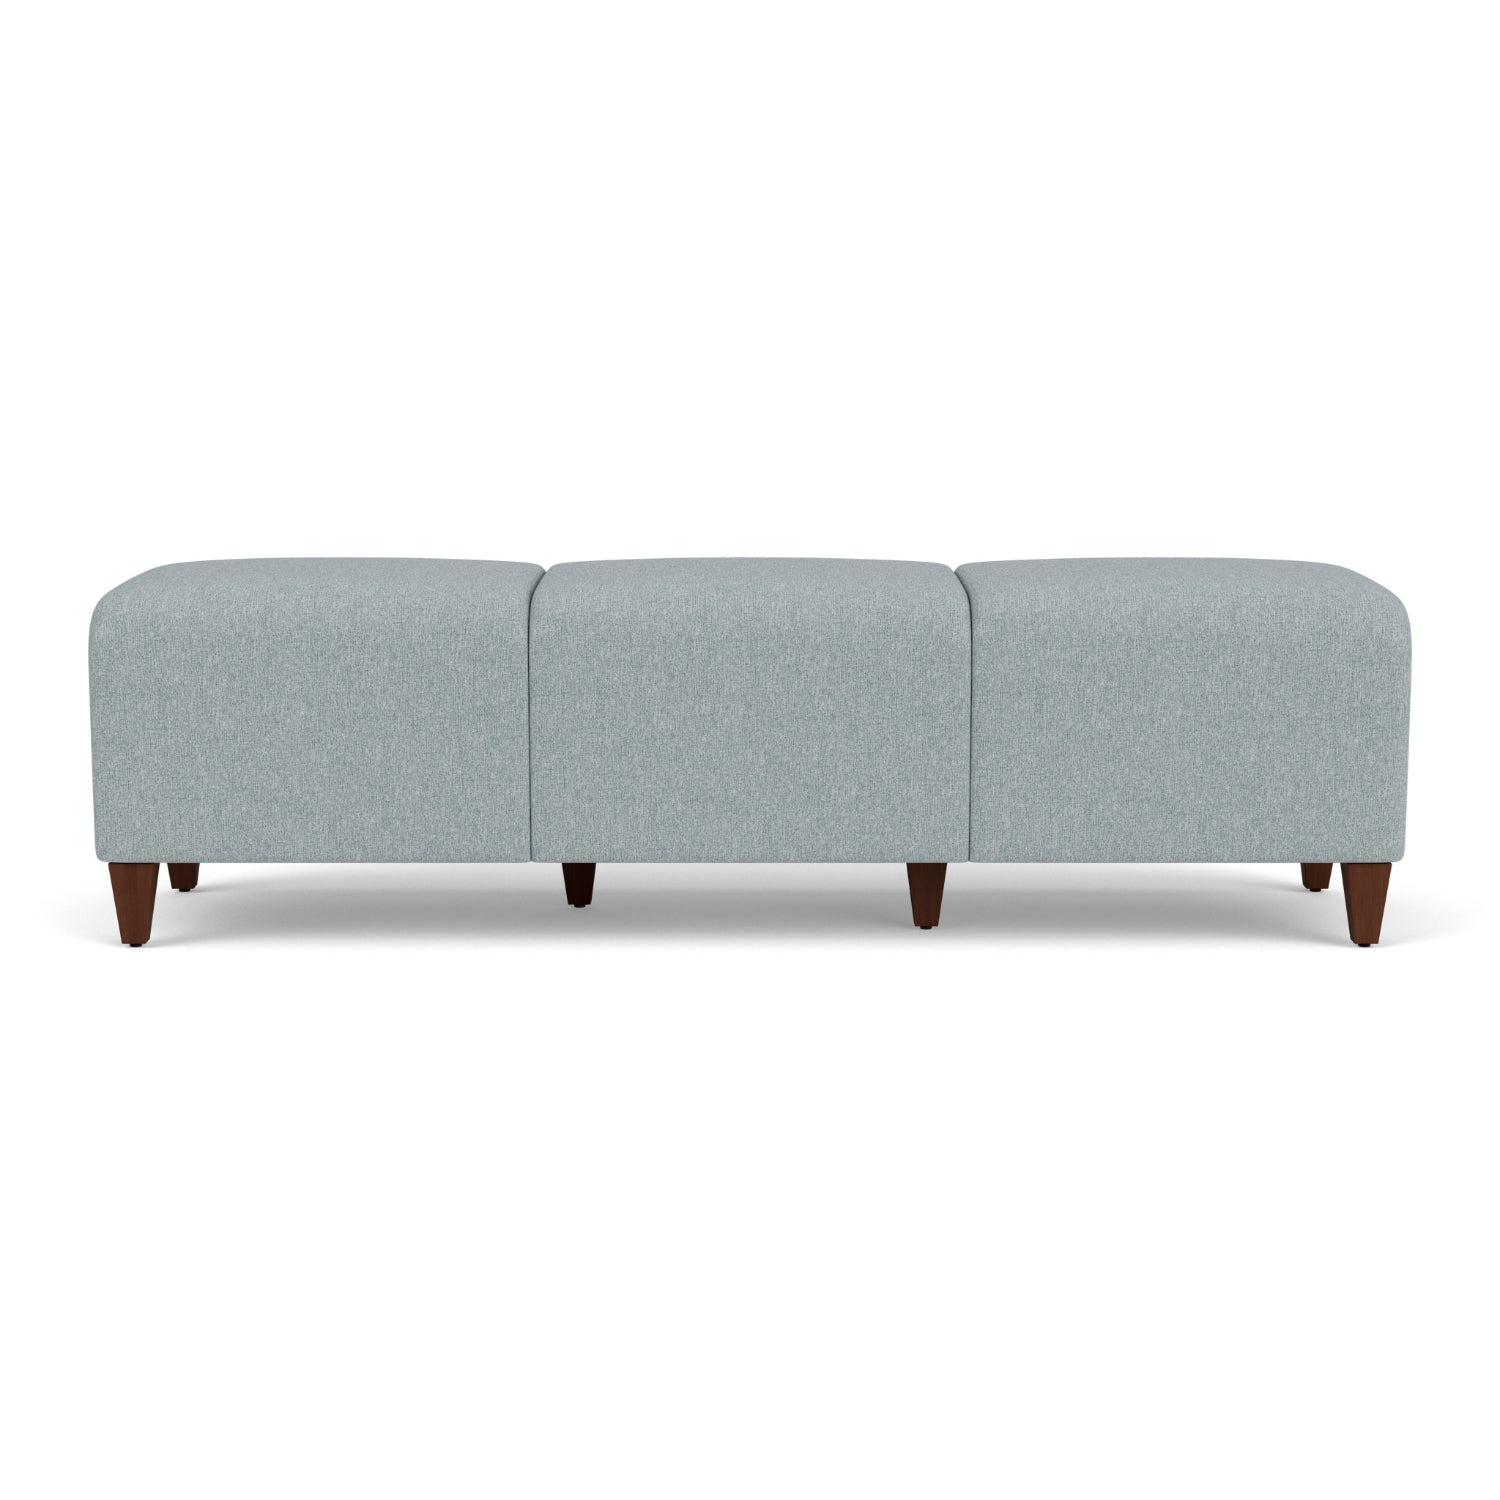 Siena Collection Reception Seating, 3-Seat Bench, Healthcare Vinyl Upholstery, FREE SHIPPING